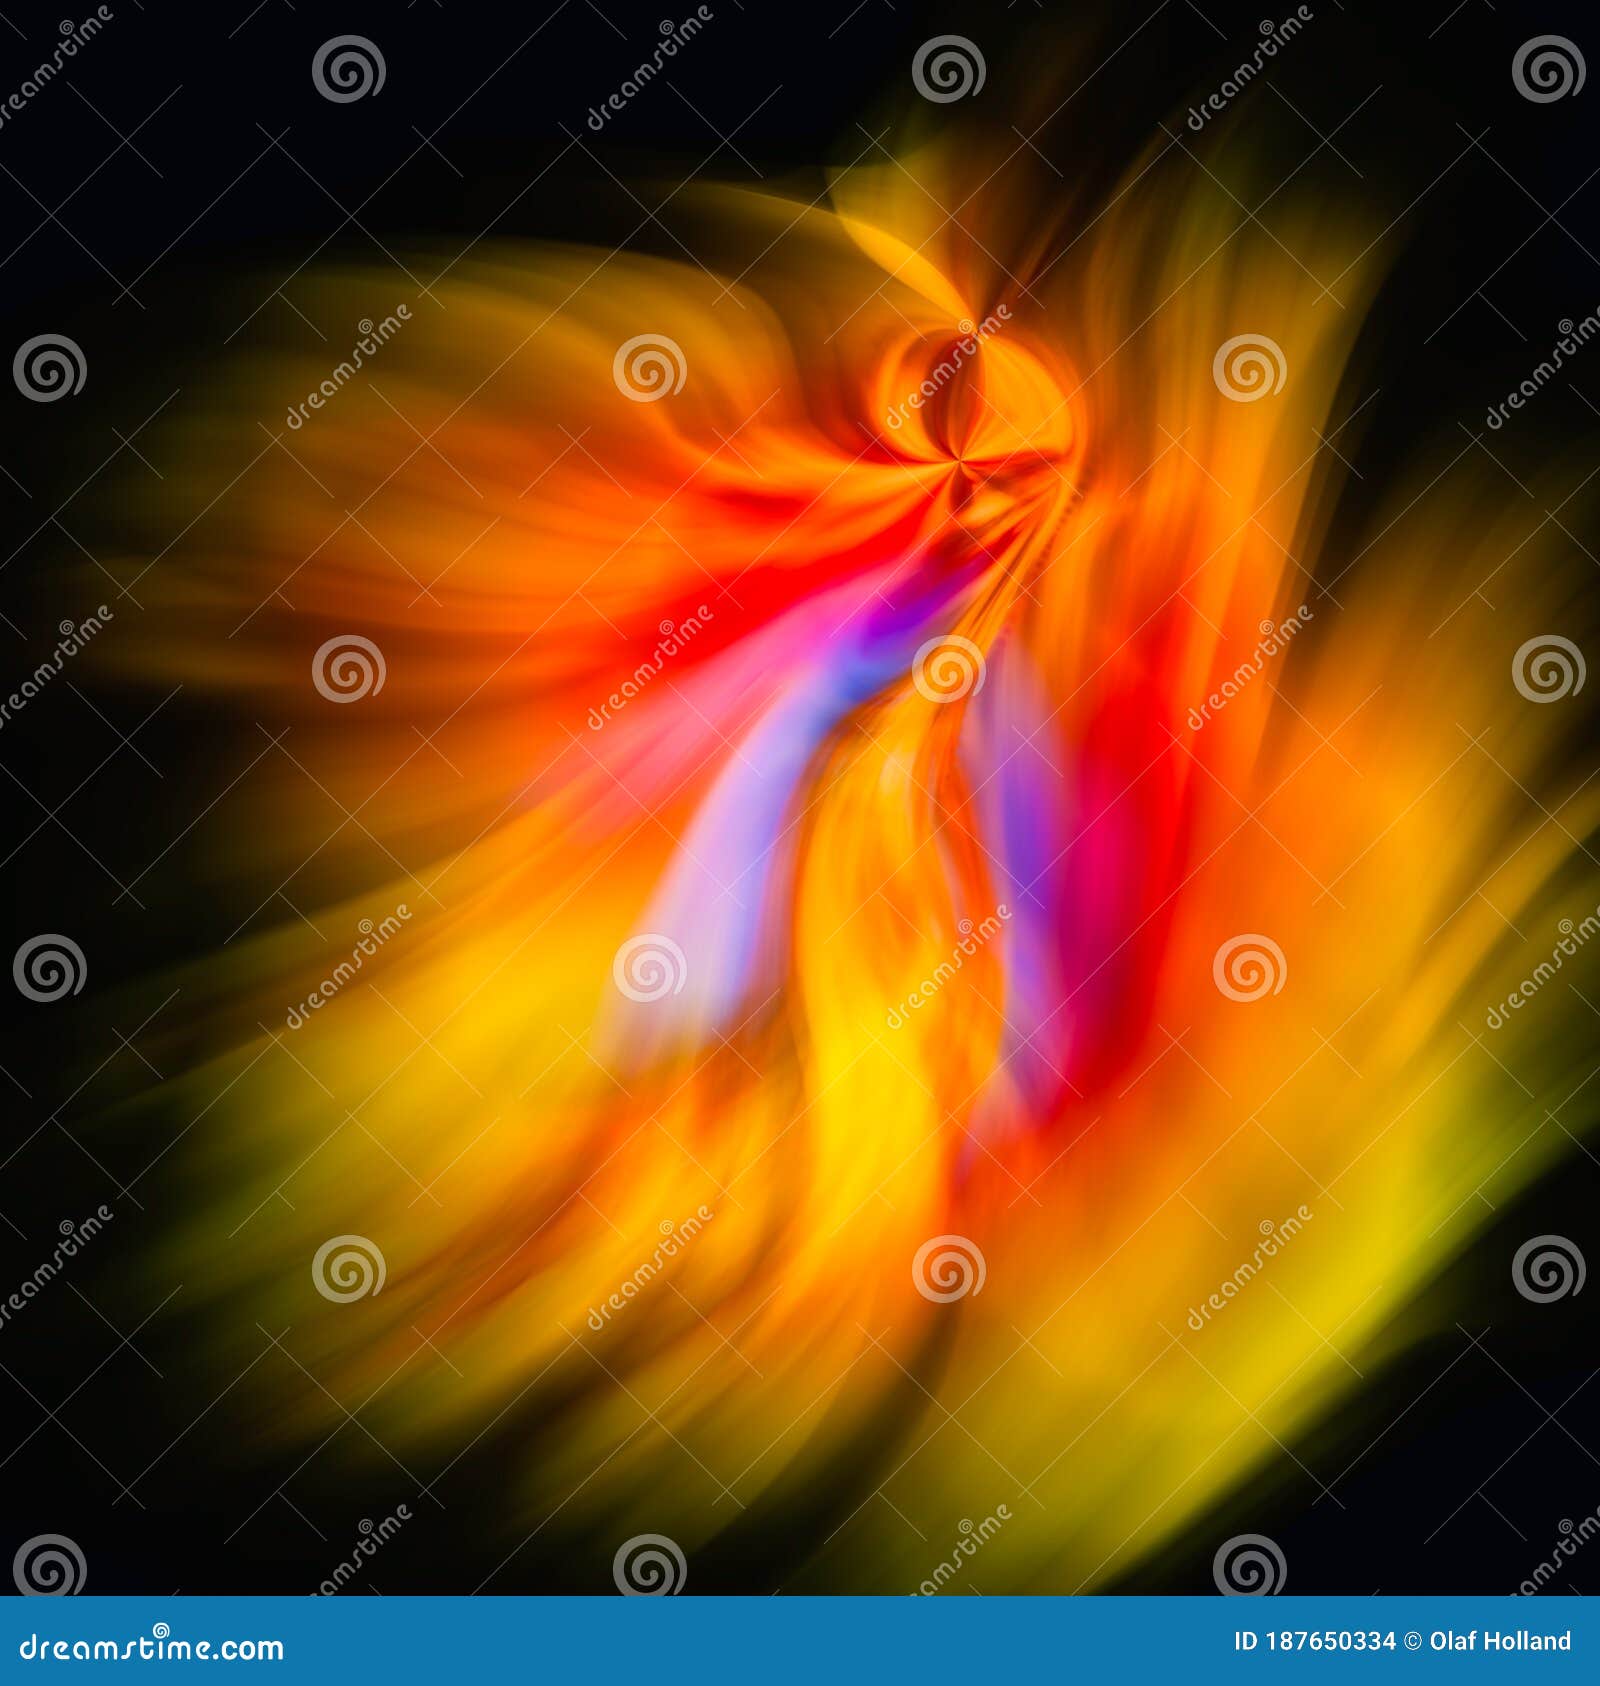 abstract fine art colorful dynamic image with red, yellow, blue and violet wiped color on black background